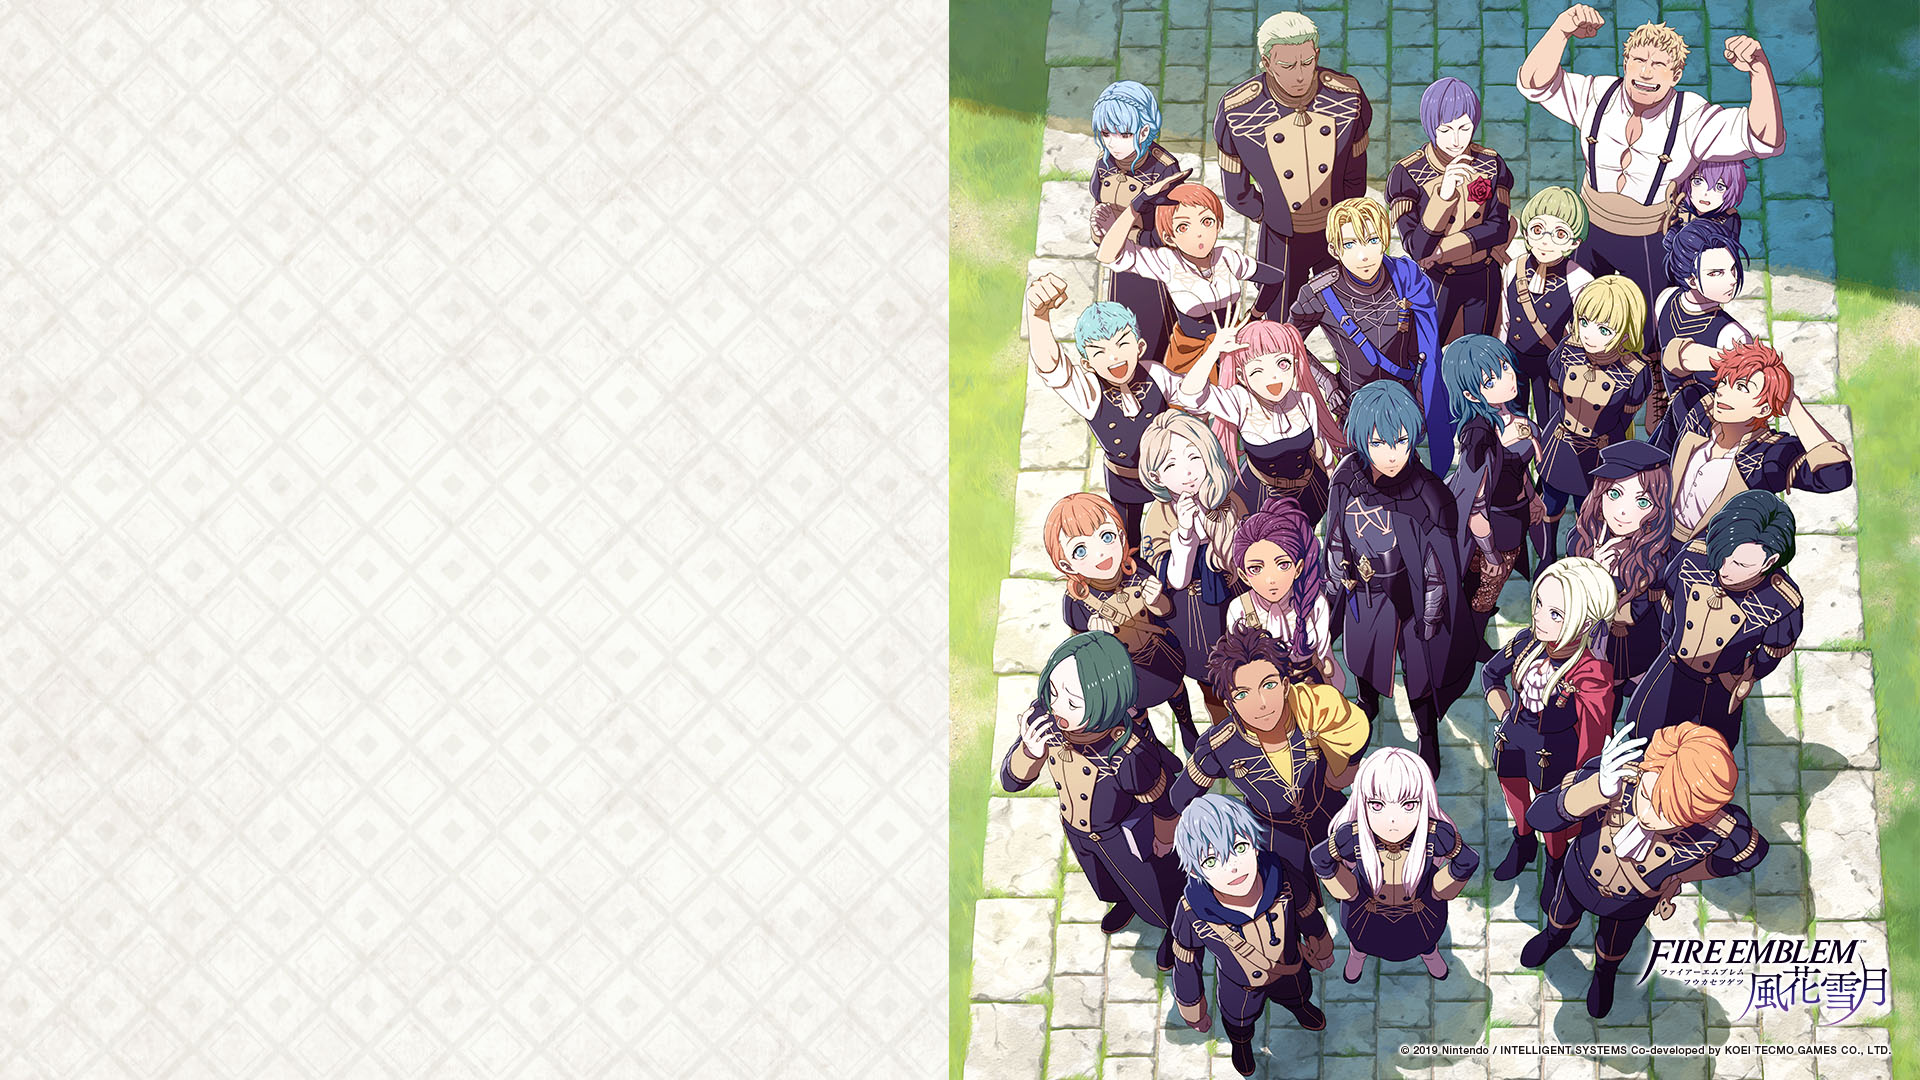 Video Game Fire Emblem: Three Houses HD Wallpaper | Background Image